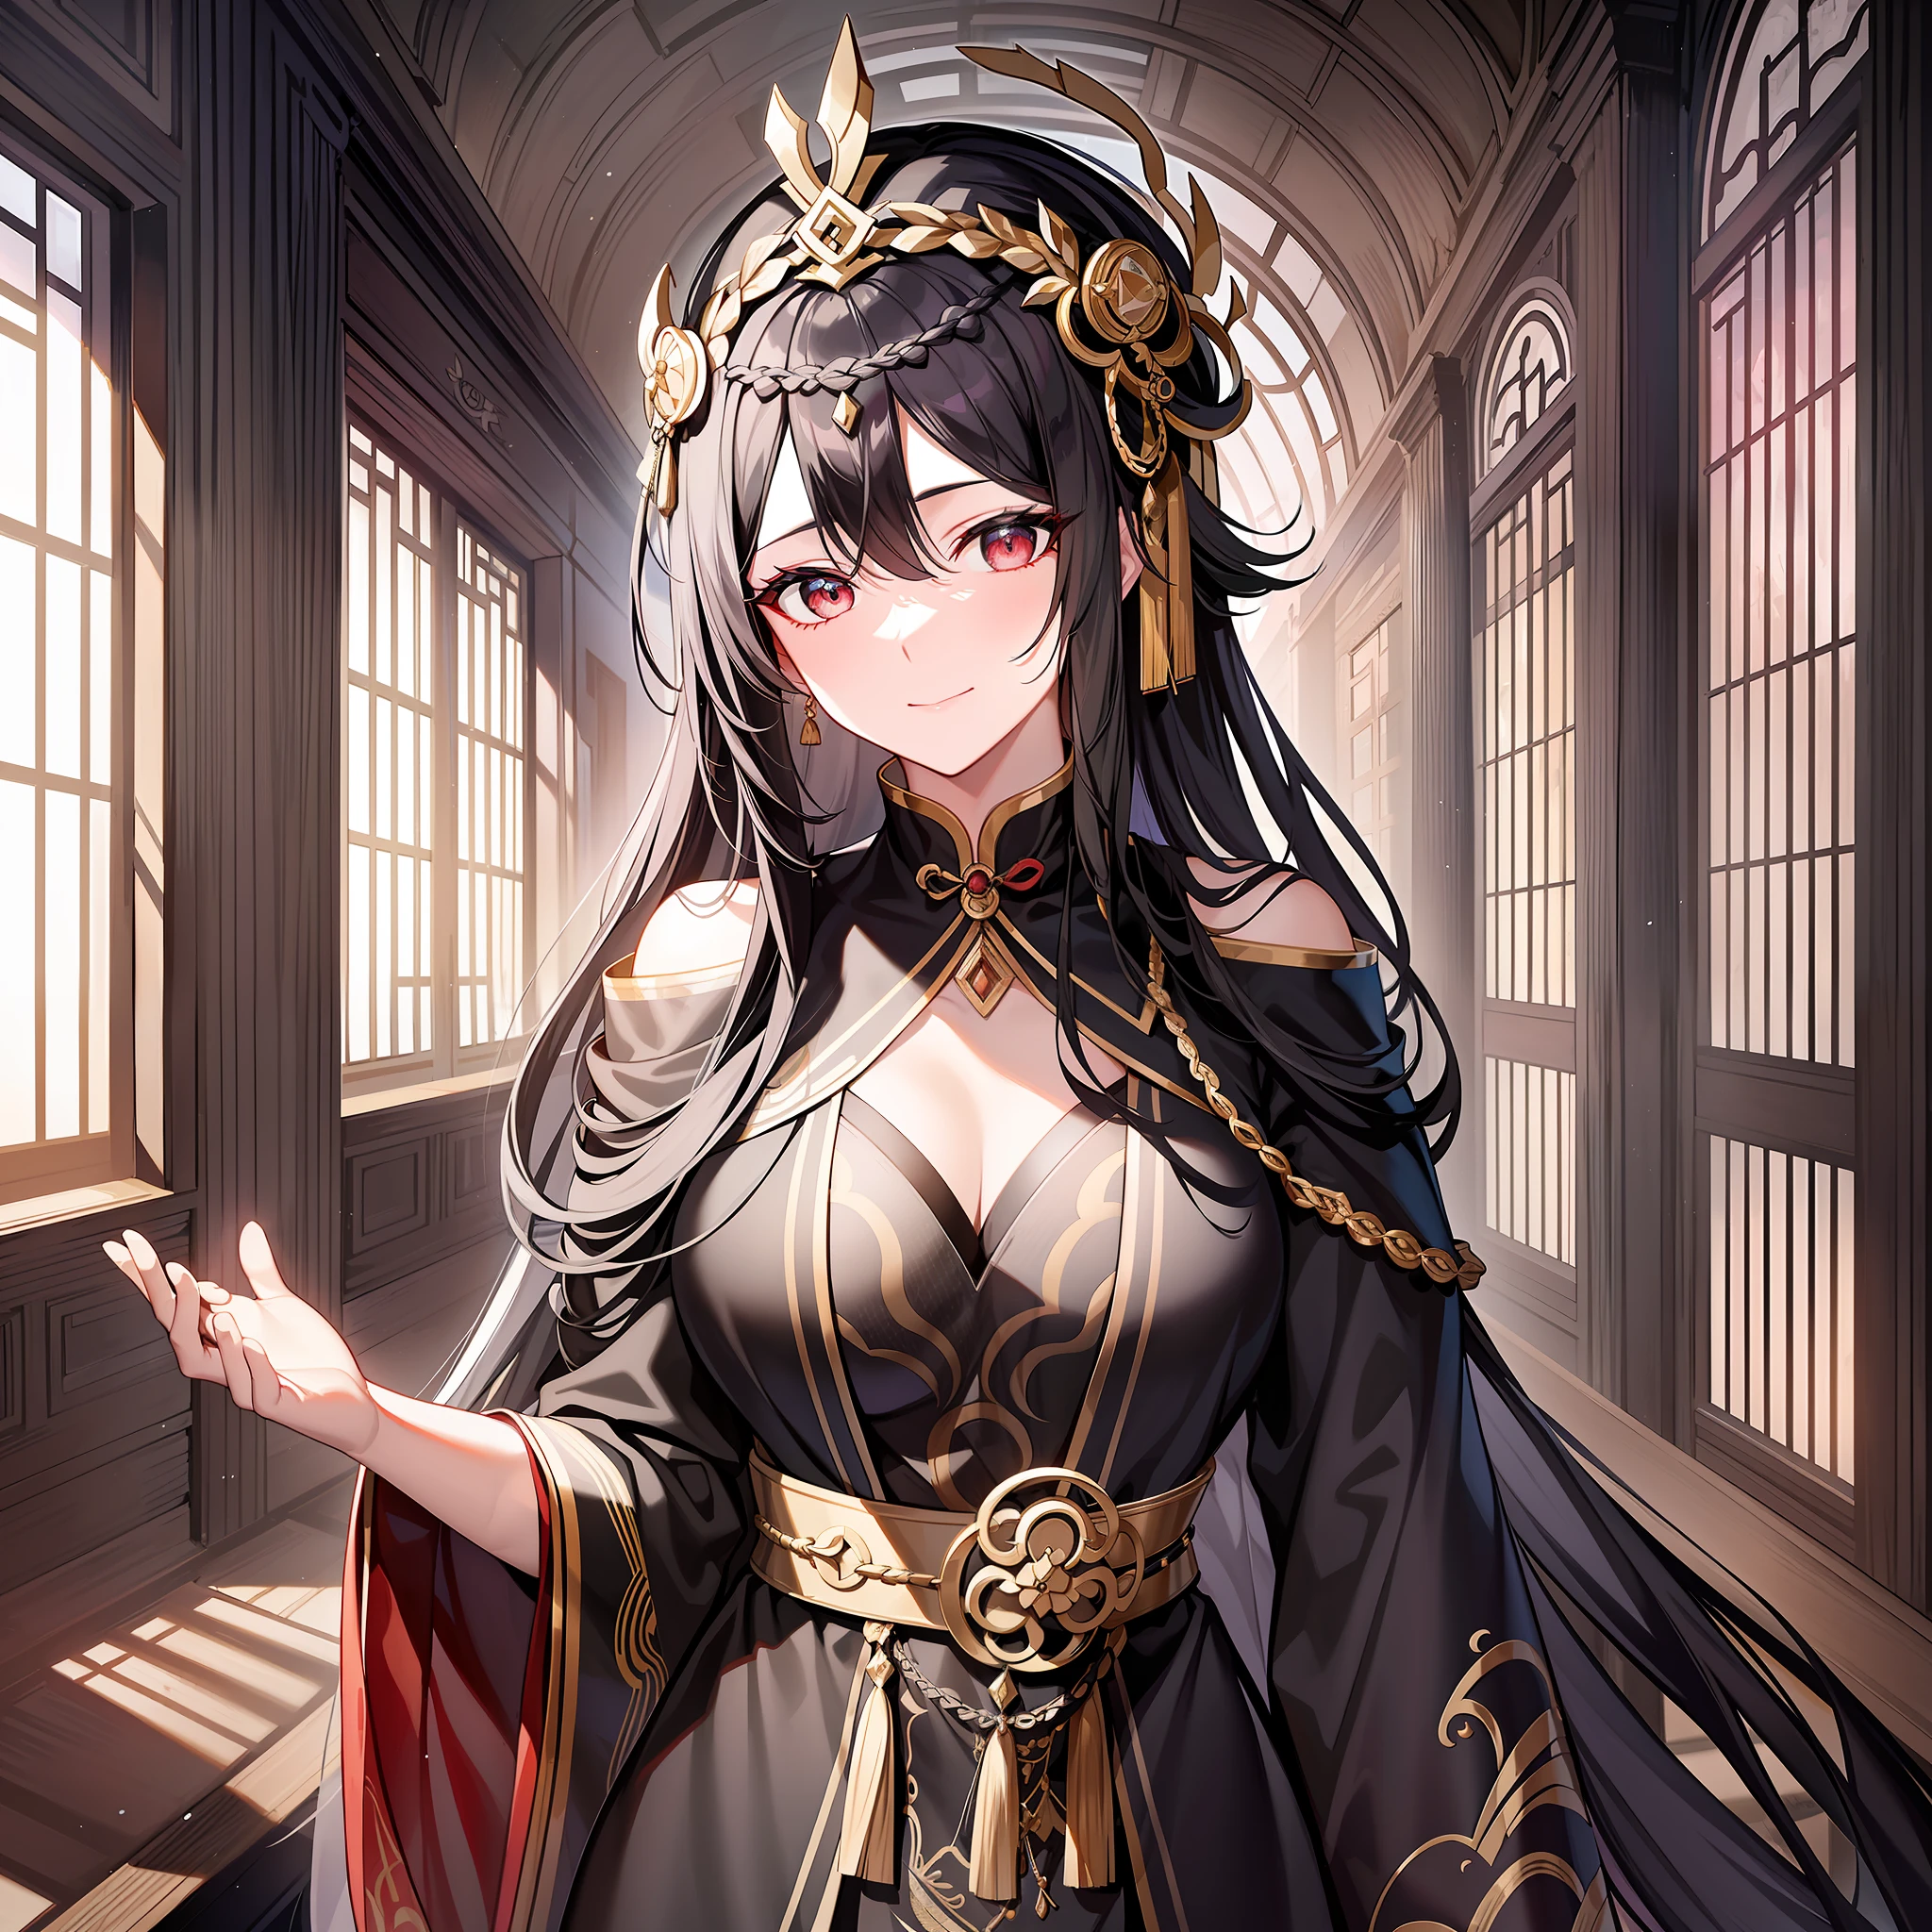 A black-haired female emperor wearing a Daoist robe walked over. Her robe is black, embroidered with silver patterns, her figure is tall and graceful, with a gentle smile on her face, but it exudes a mysterious and noble atmosphere. Her eyes were deep and full of wisdom, as if they stored the wisdom of all things in the world